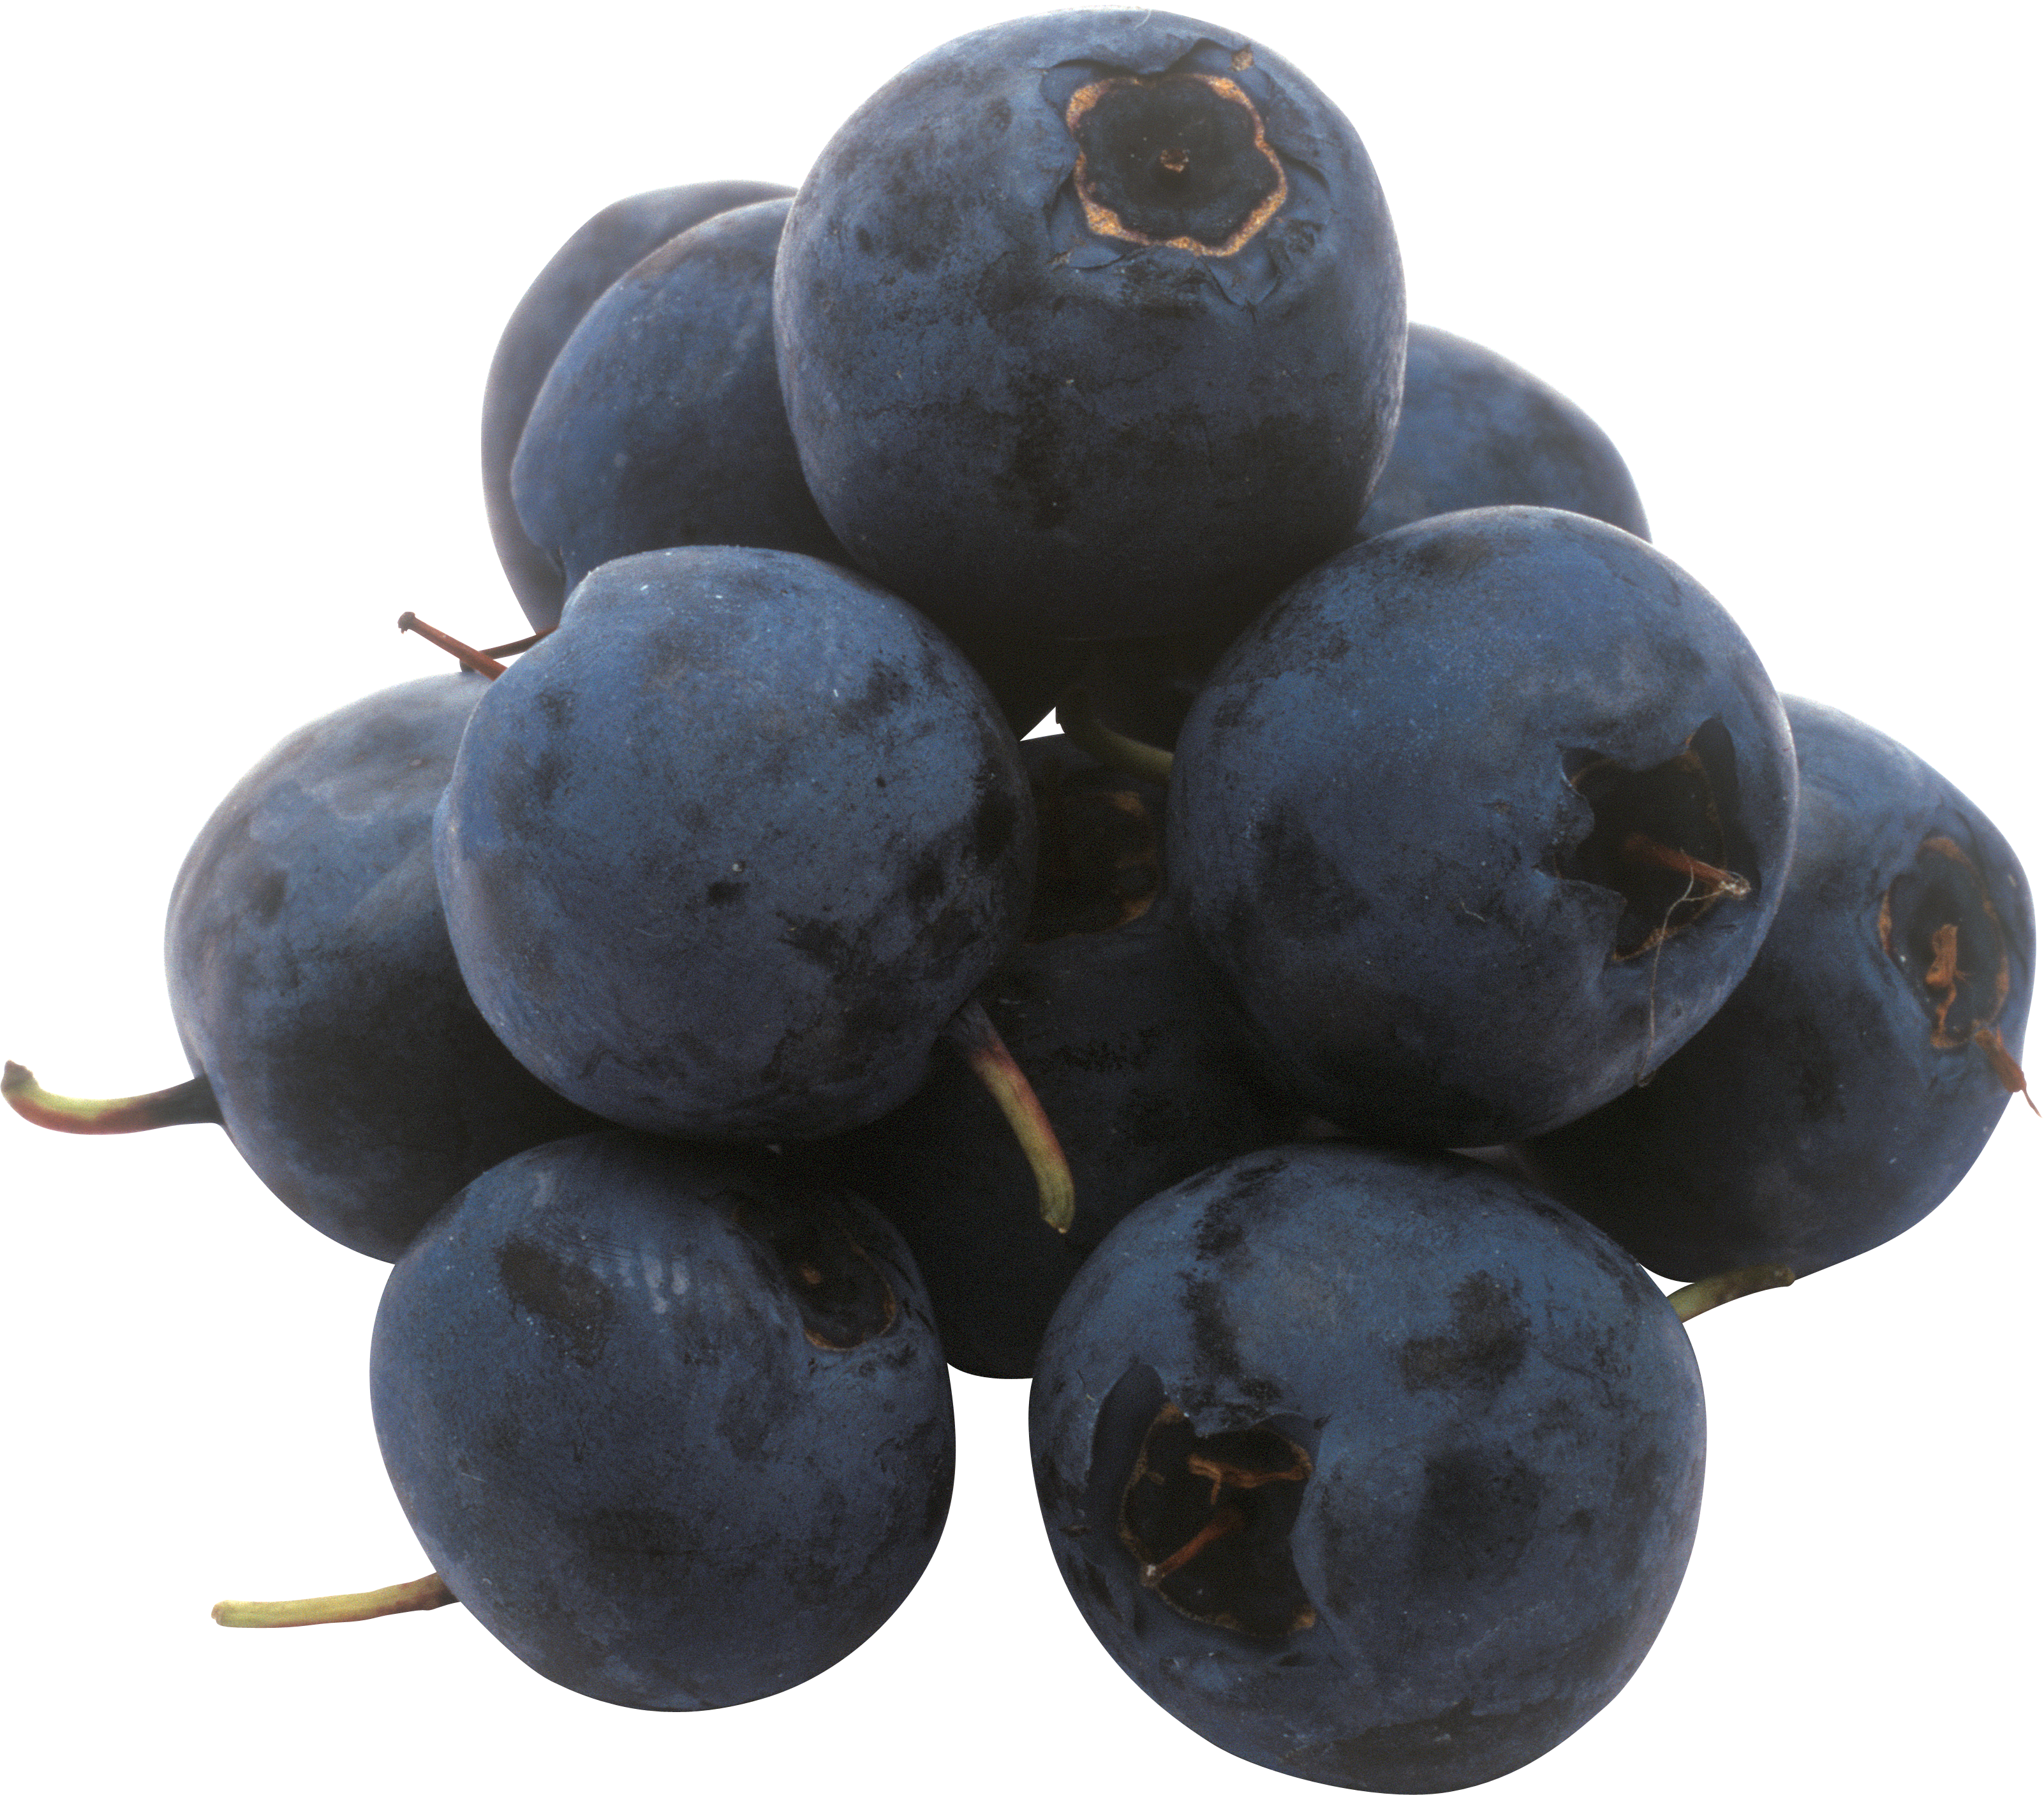 Blueberries PNG